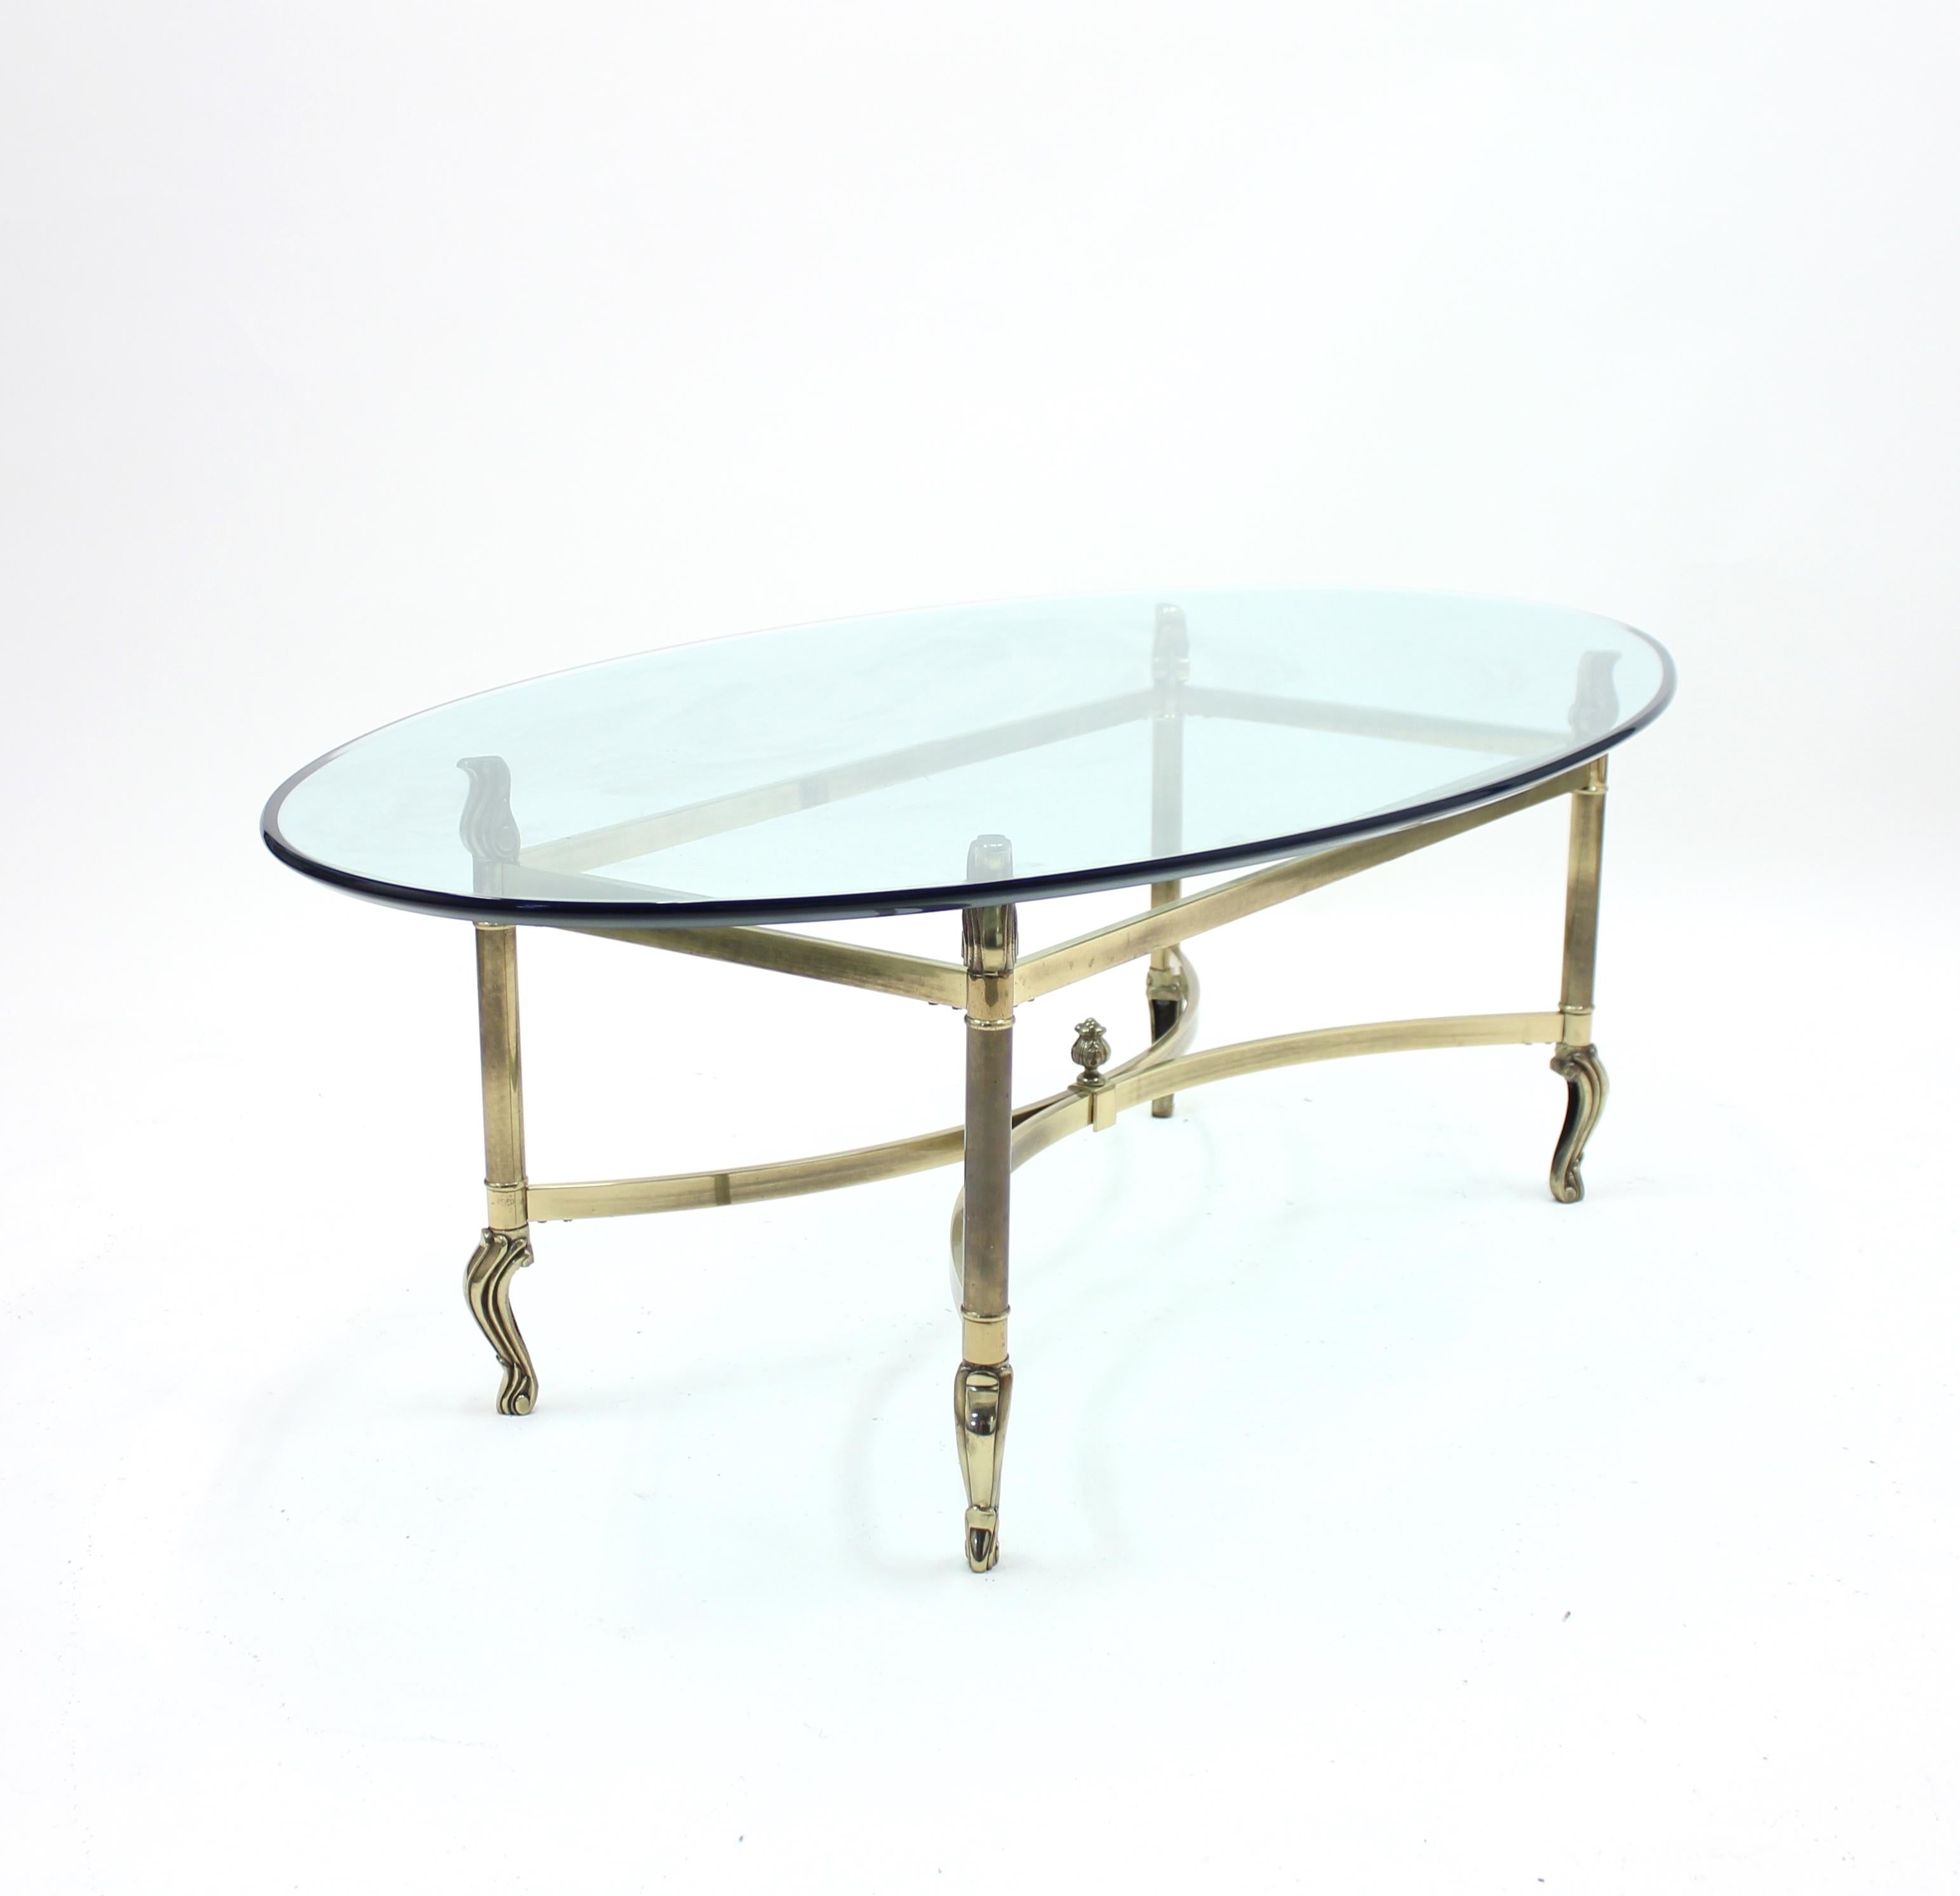 1980s oval brass table in a neoclassical style with detailed ornaments. Good vintage condition with ware consistent with age and use.
  